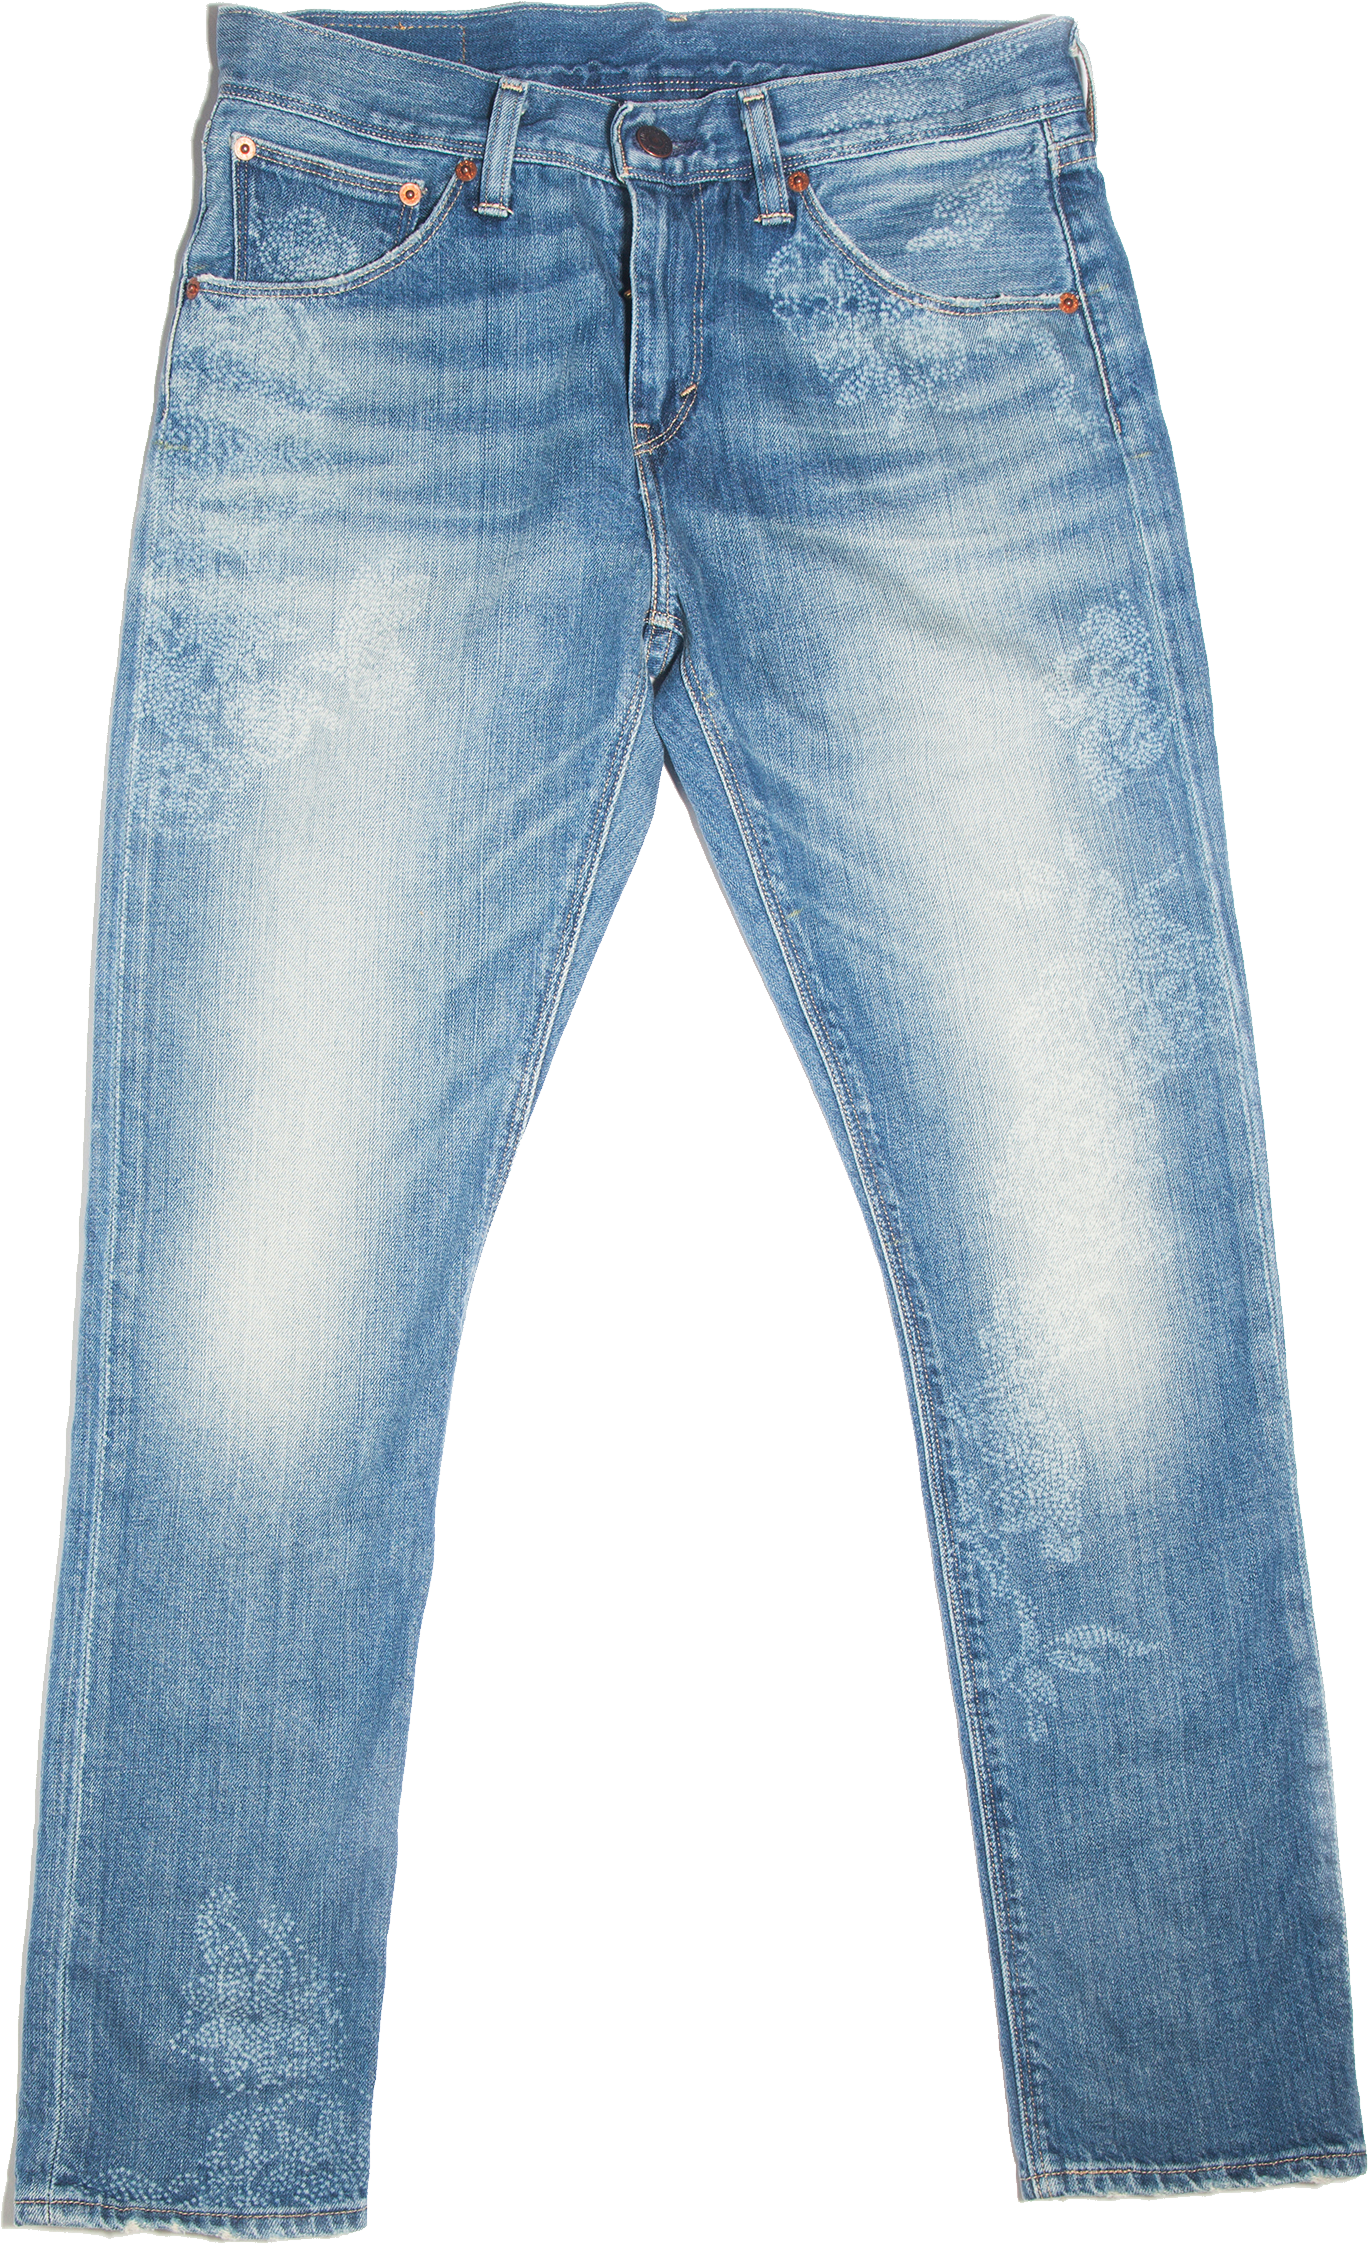 Transparent pencil and in. Shirt clipart jeans